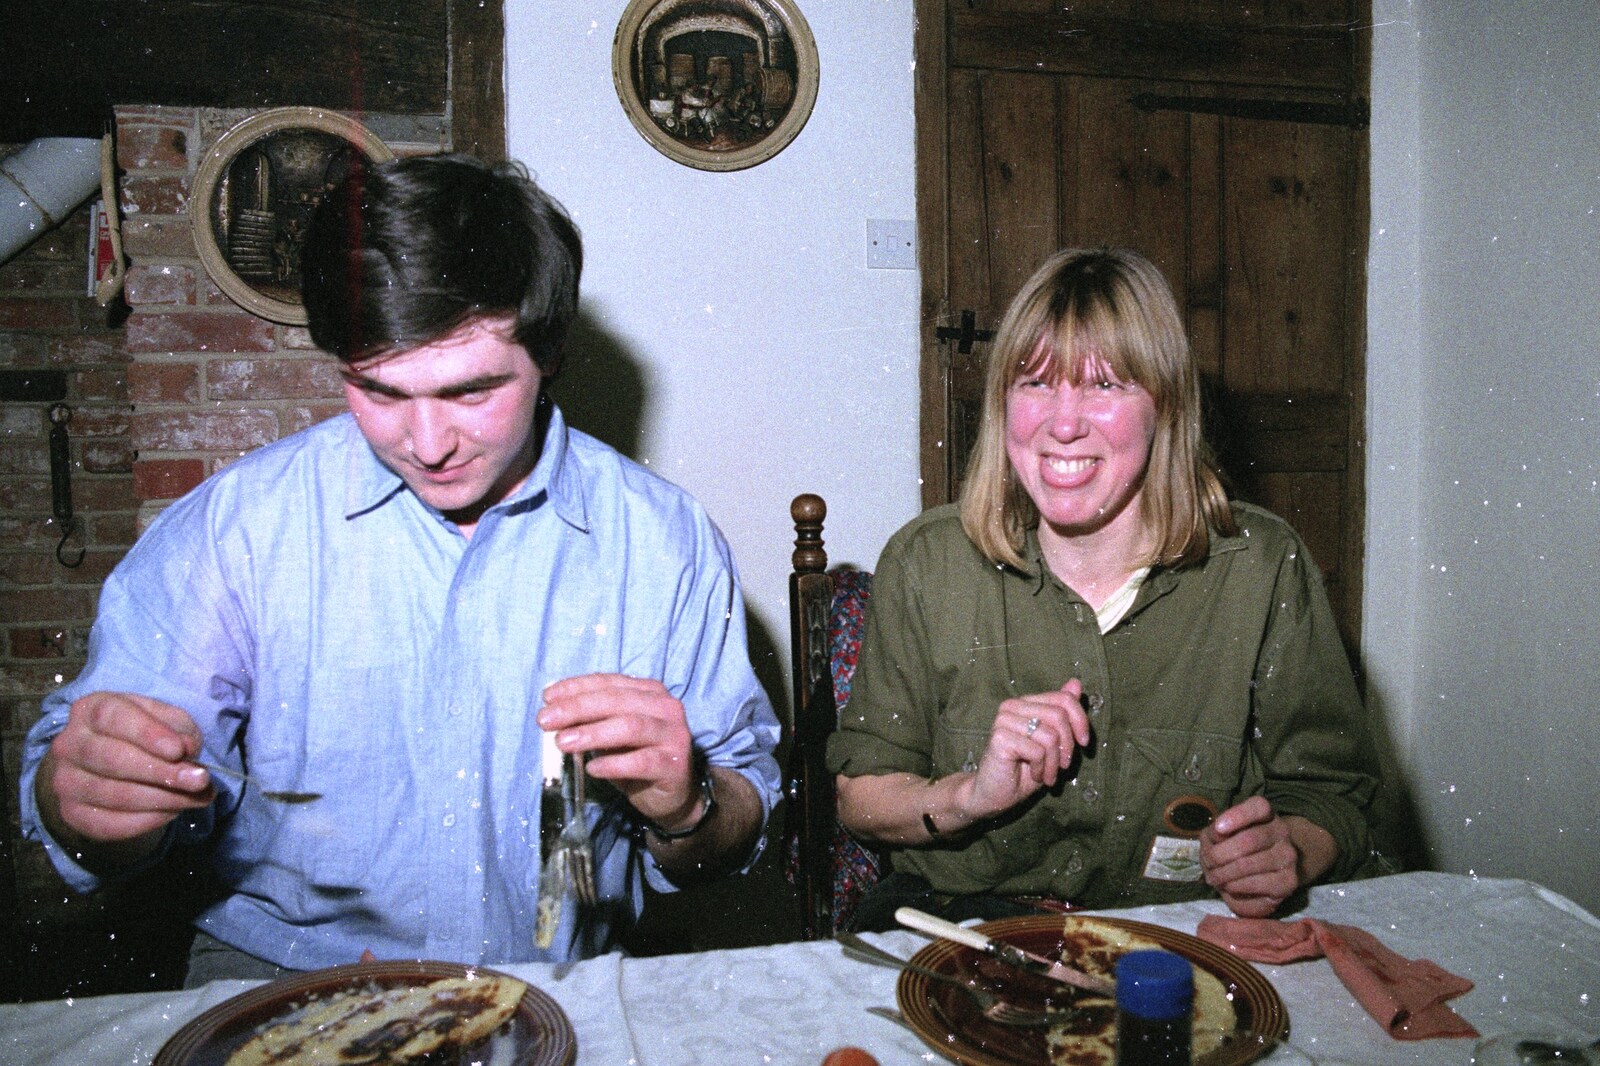 David and Janet again from Pancake Day, Stuston, Suffolk - 18th February 1991